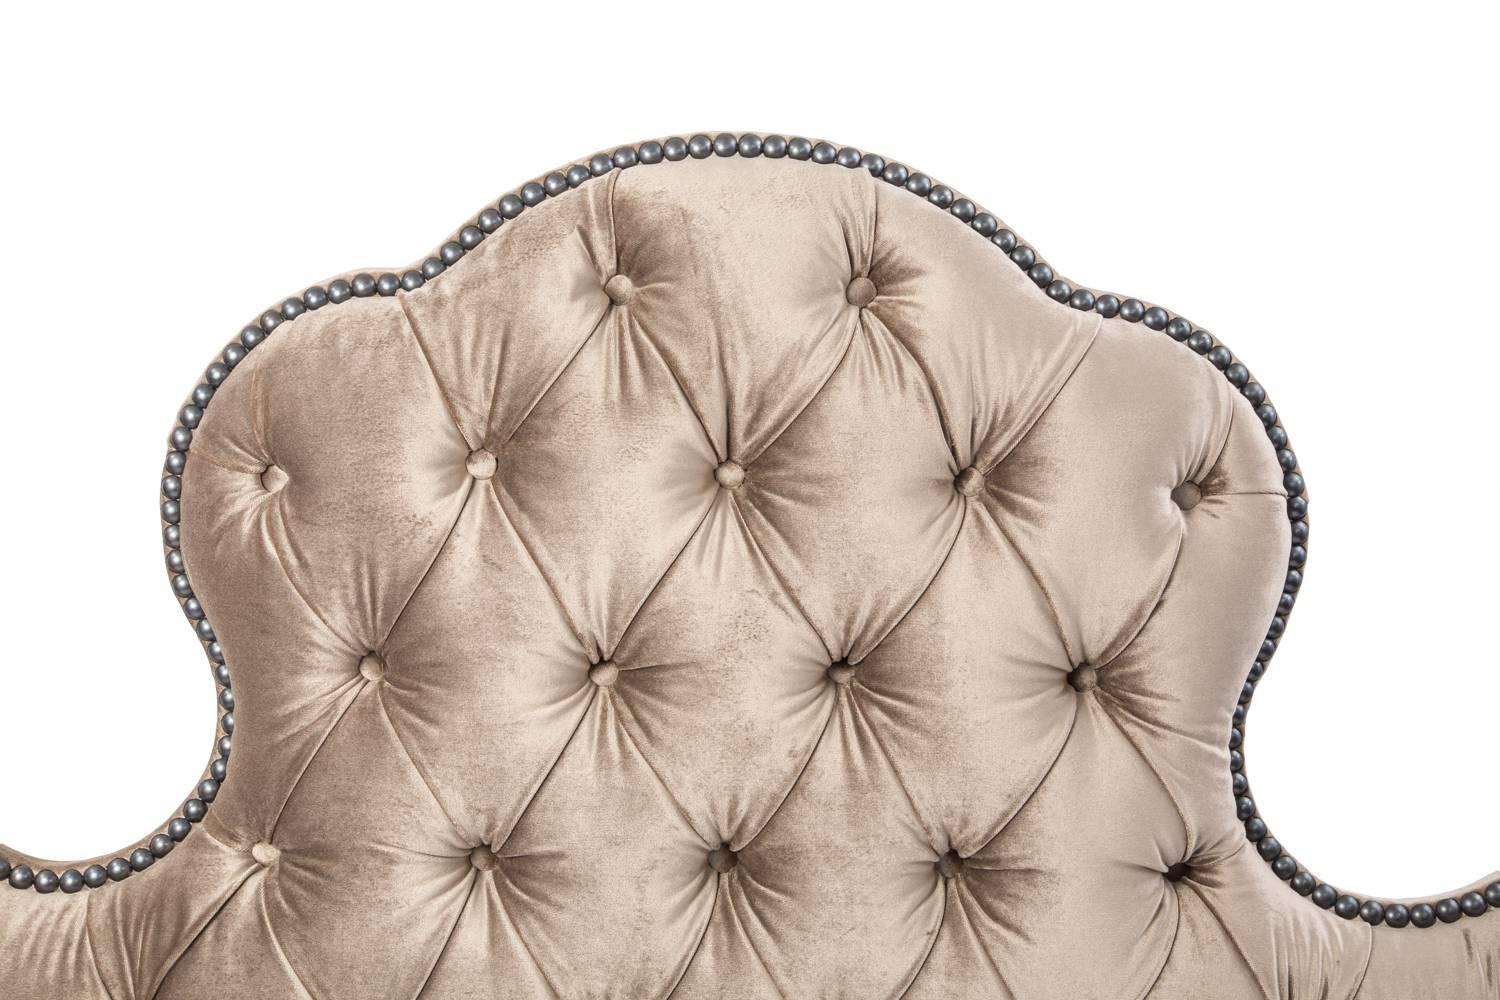 Hollywood Regency inspired queen-size tufted headboard in fabric Champagne velvet with darkened steel color nail heads. A signature custom designed headboard by designer Christina Karras. Custom options are available, price will vary. For all custom